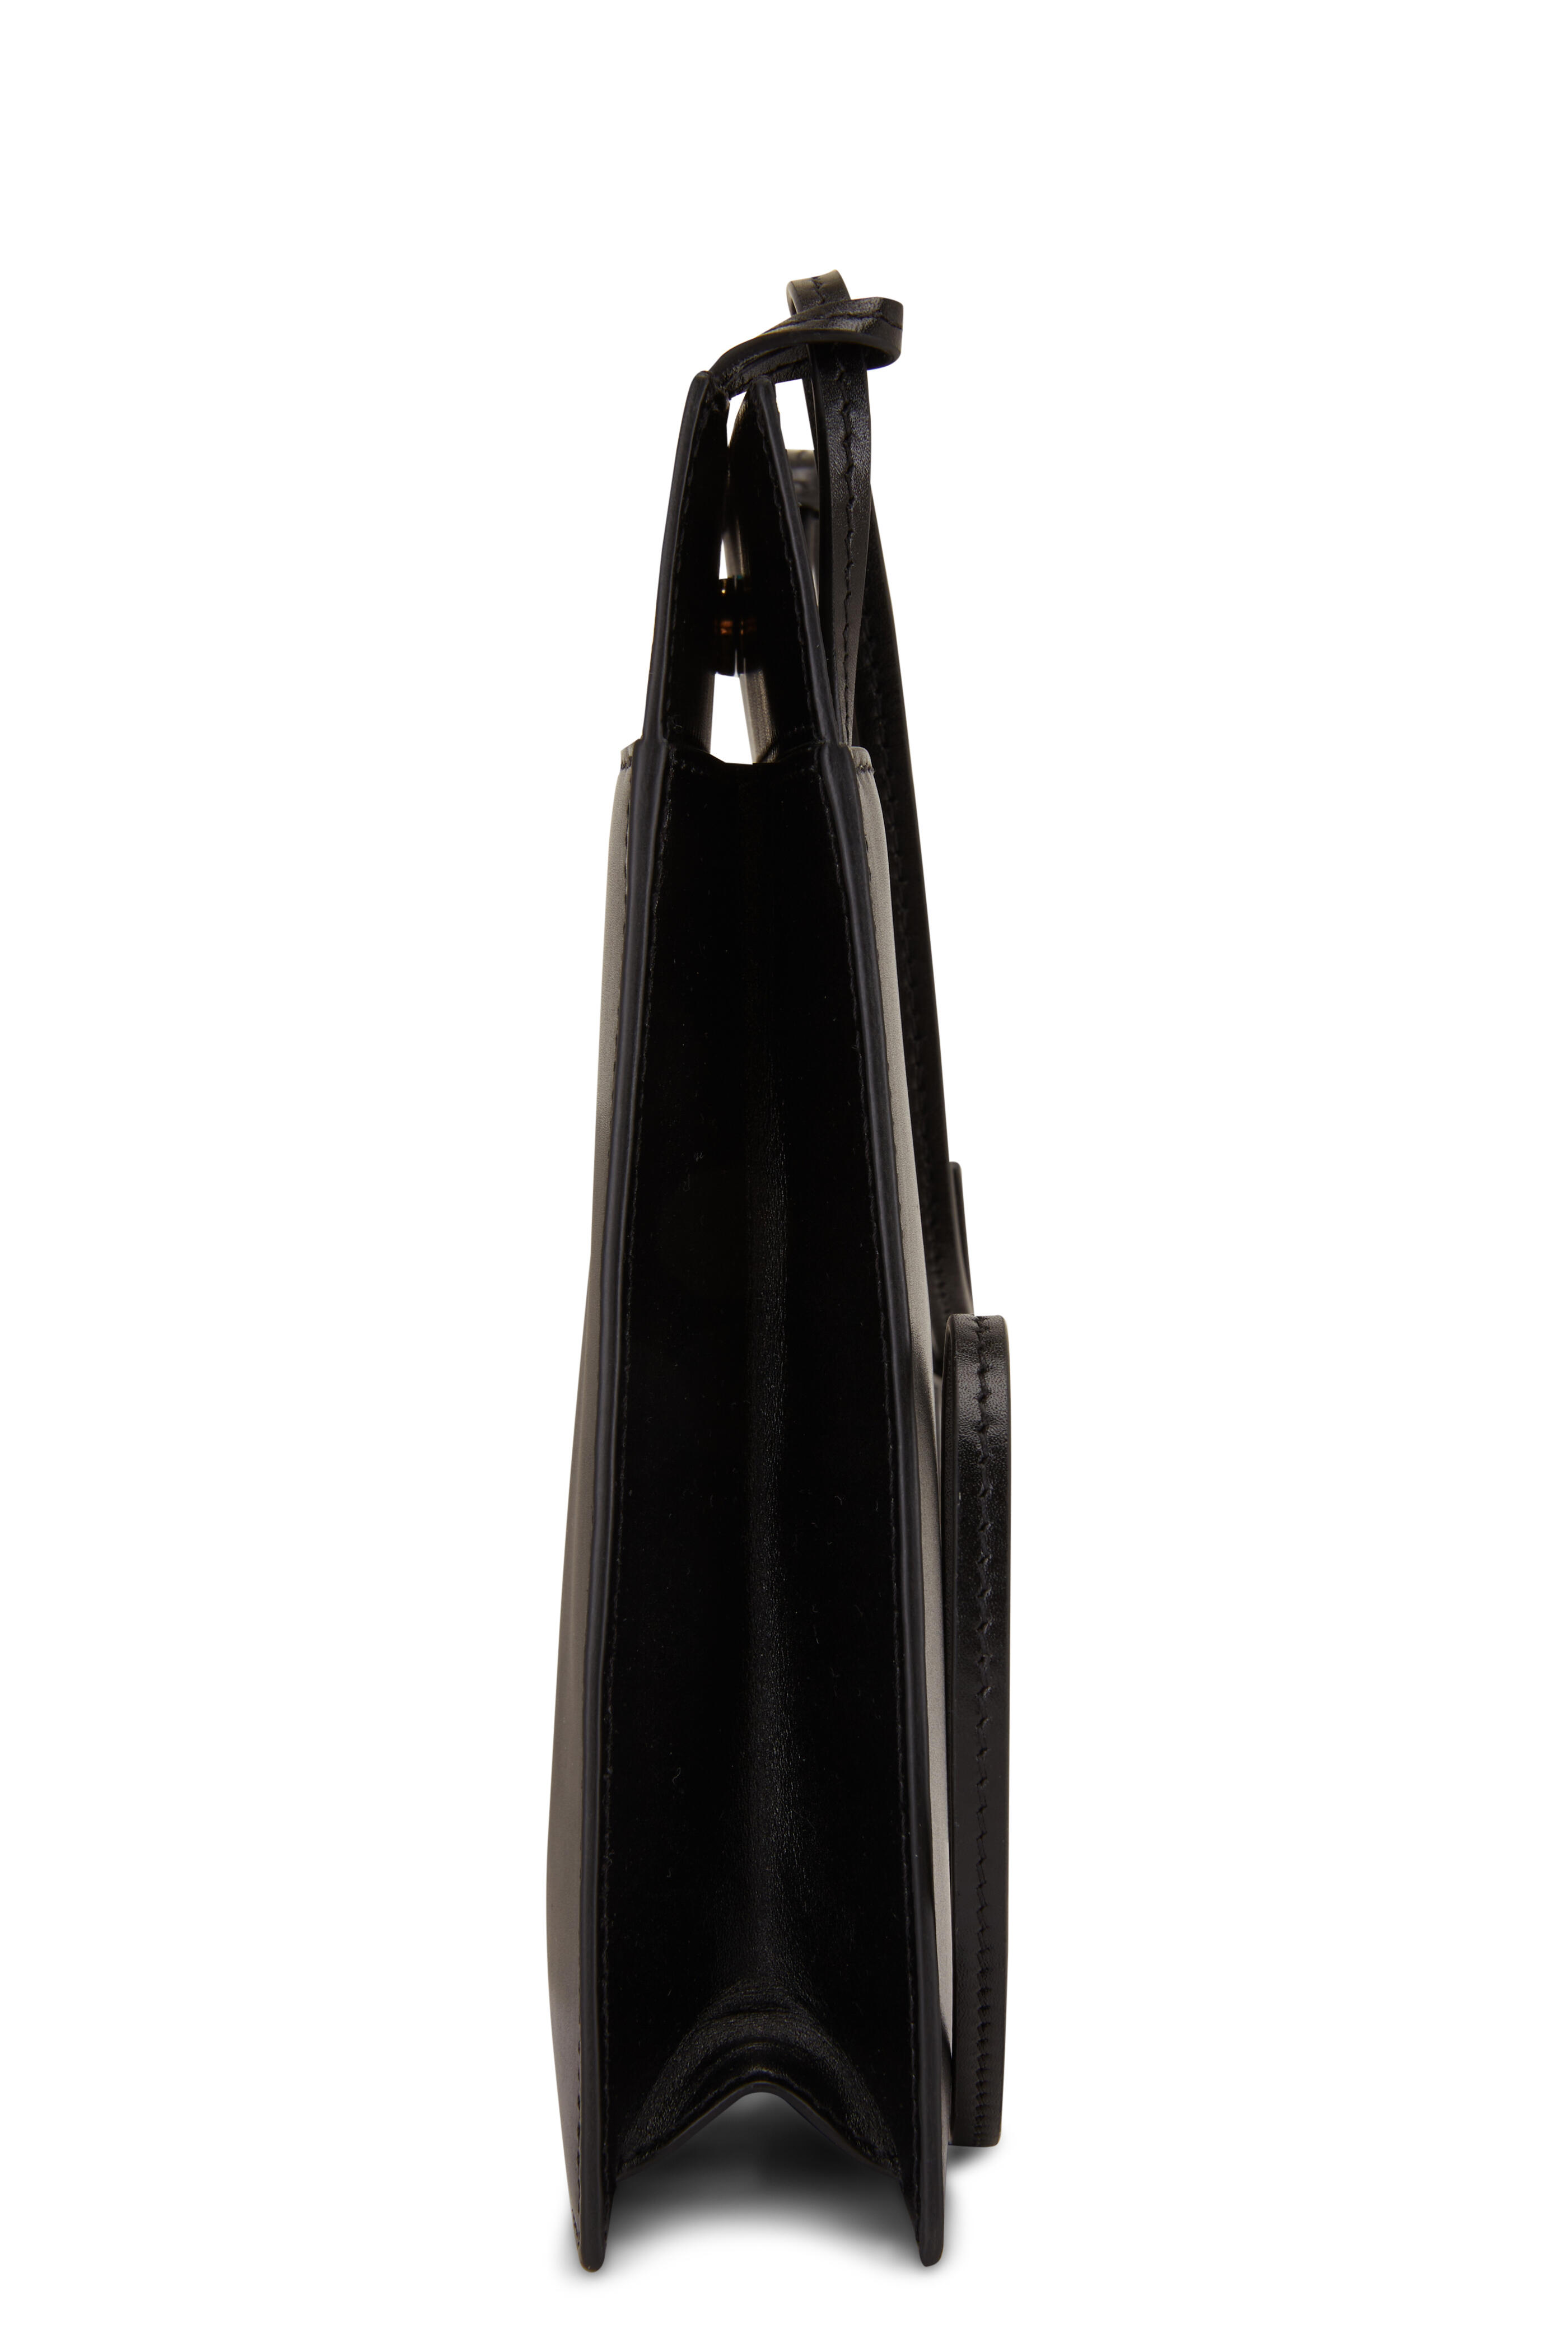 The Row - Debee Double Black Leather Shoulder Bag